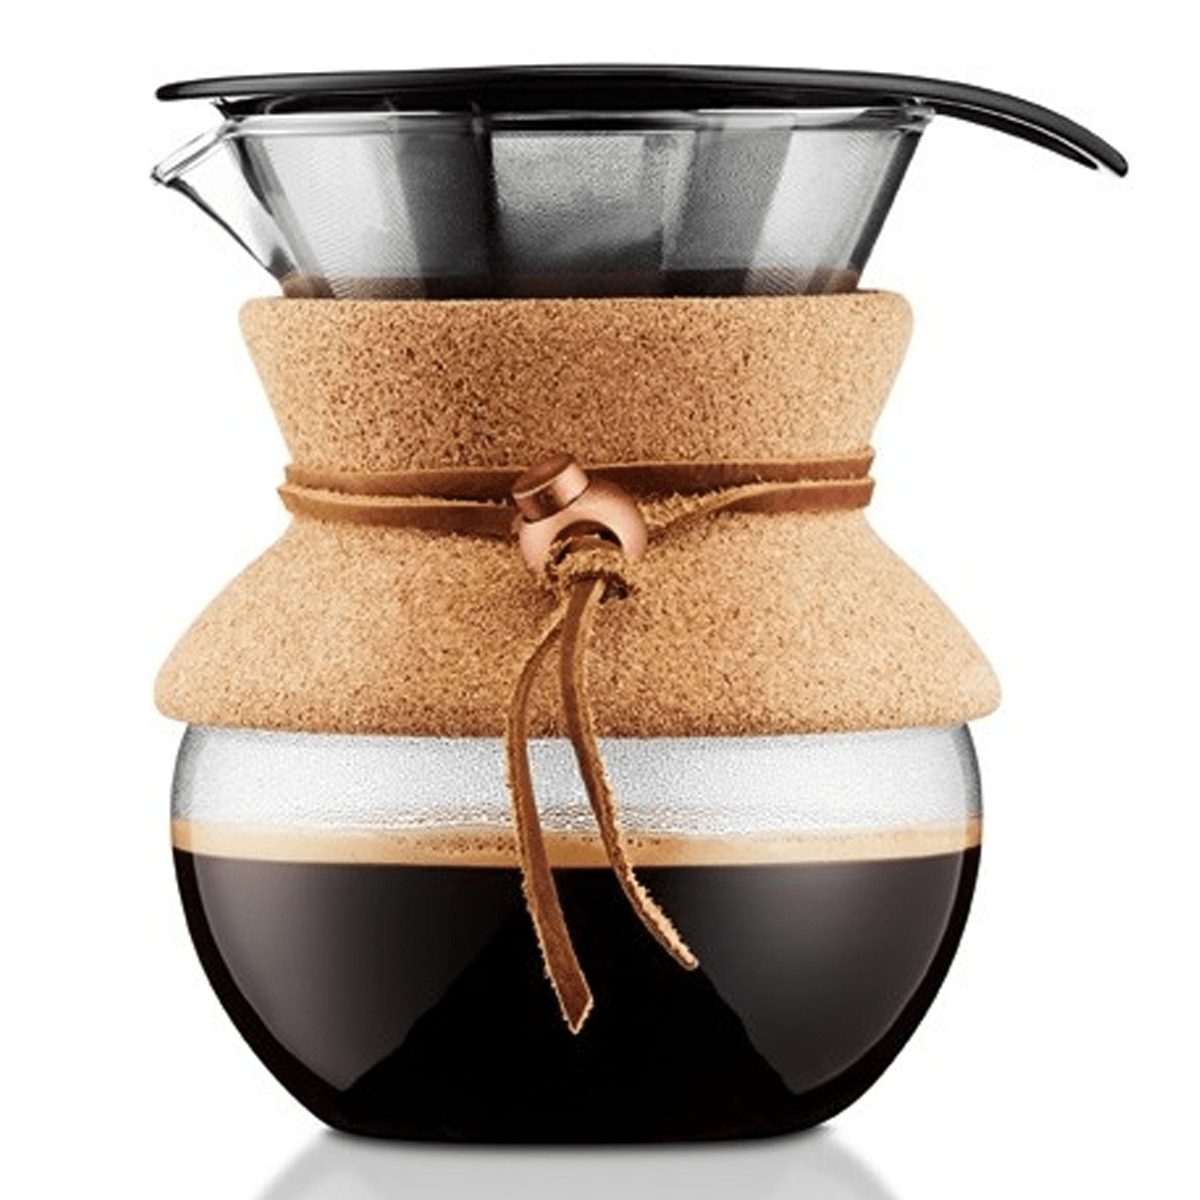 Bodum Pour Over Coffee Maker with Cork